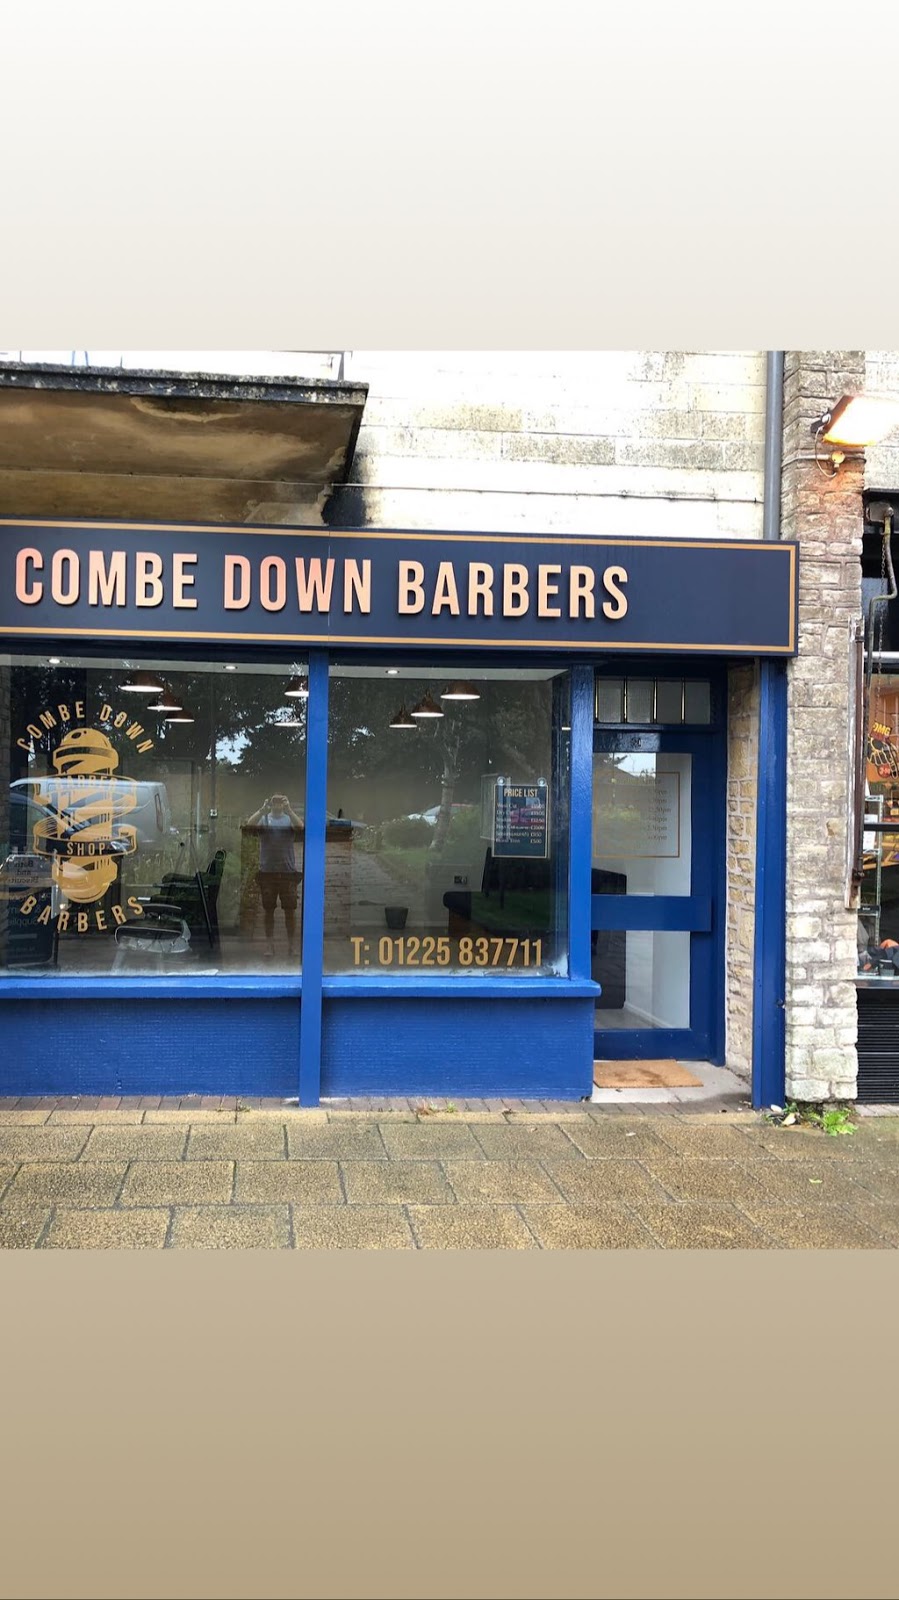 Combe Down Barbers